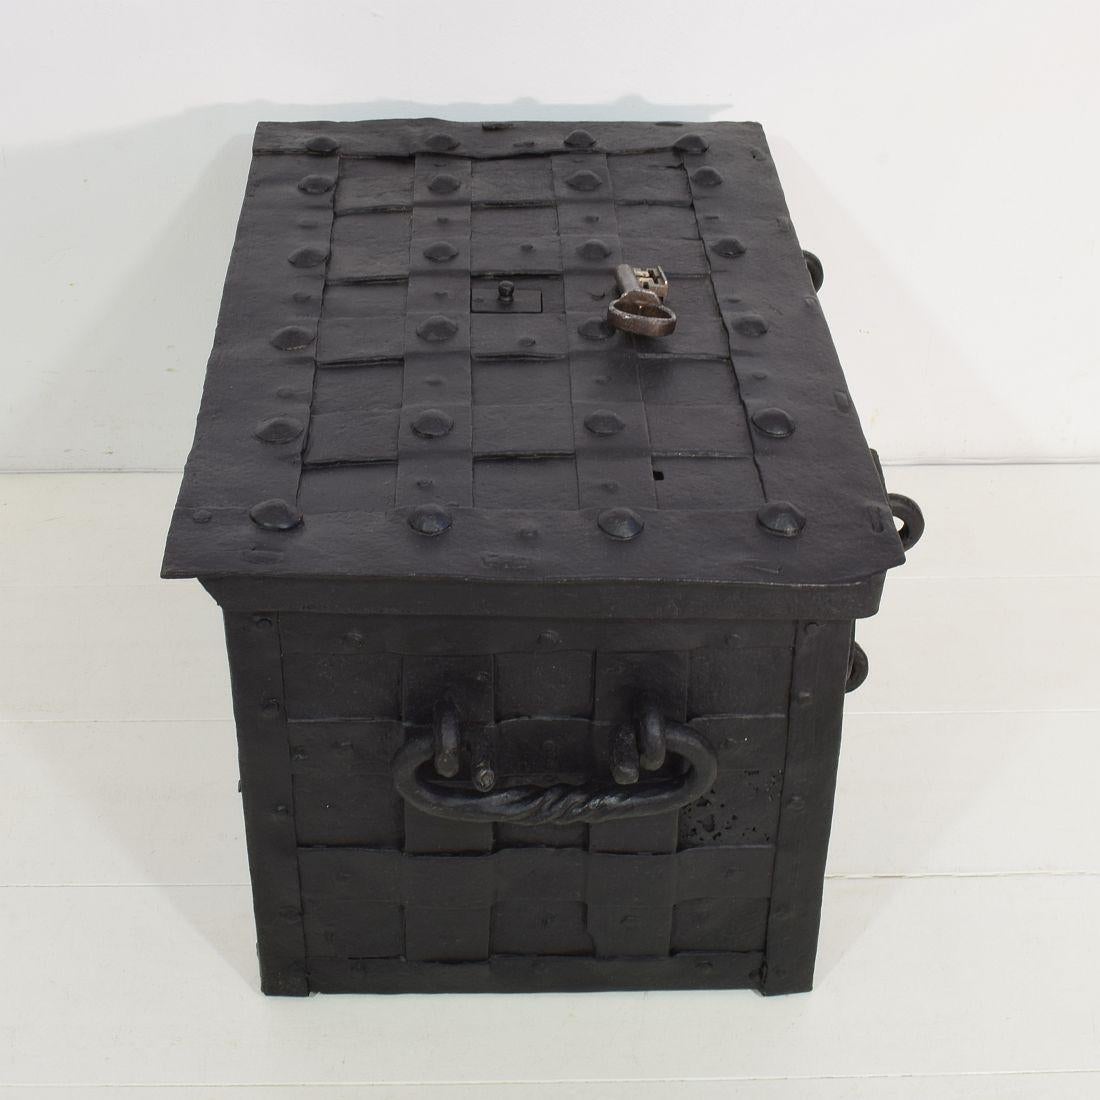 18th Century and Earlier 17th Century German Hand Forged Iron Strongbox from Nuremberg or Augsburg